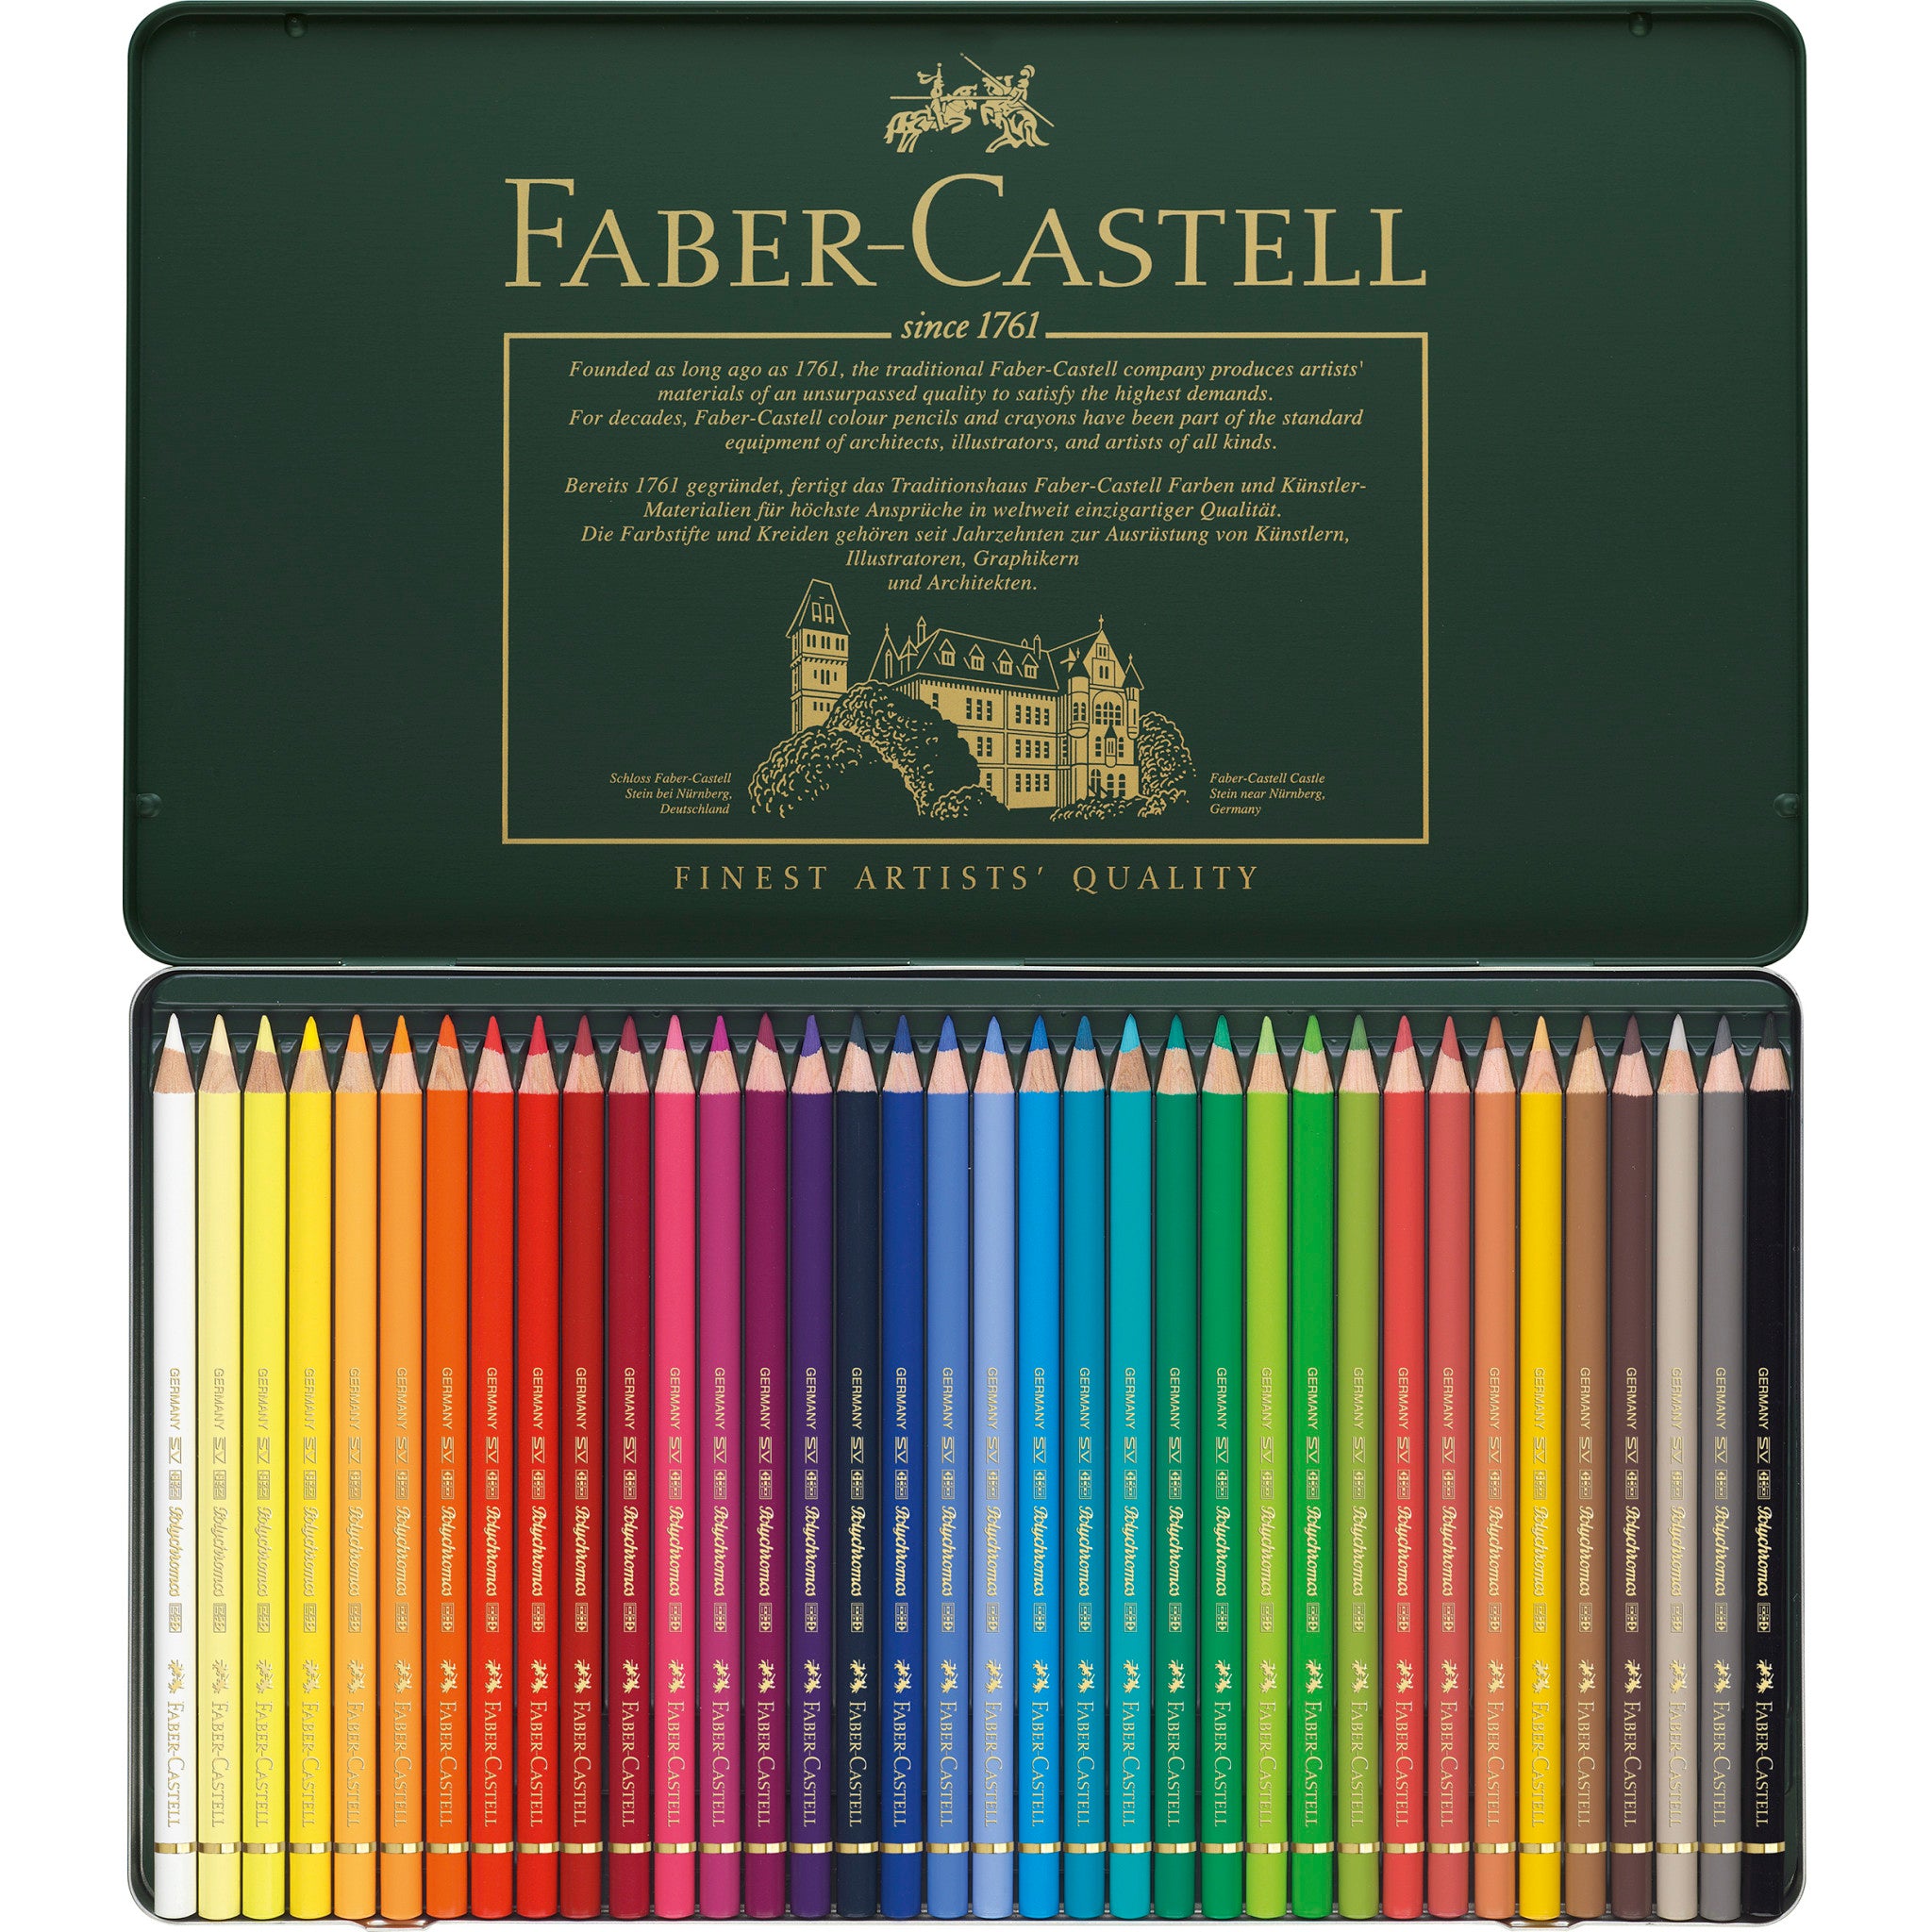 36 Faber-Castell Polychromos Colored Pencils: Unboxing and Color Order